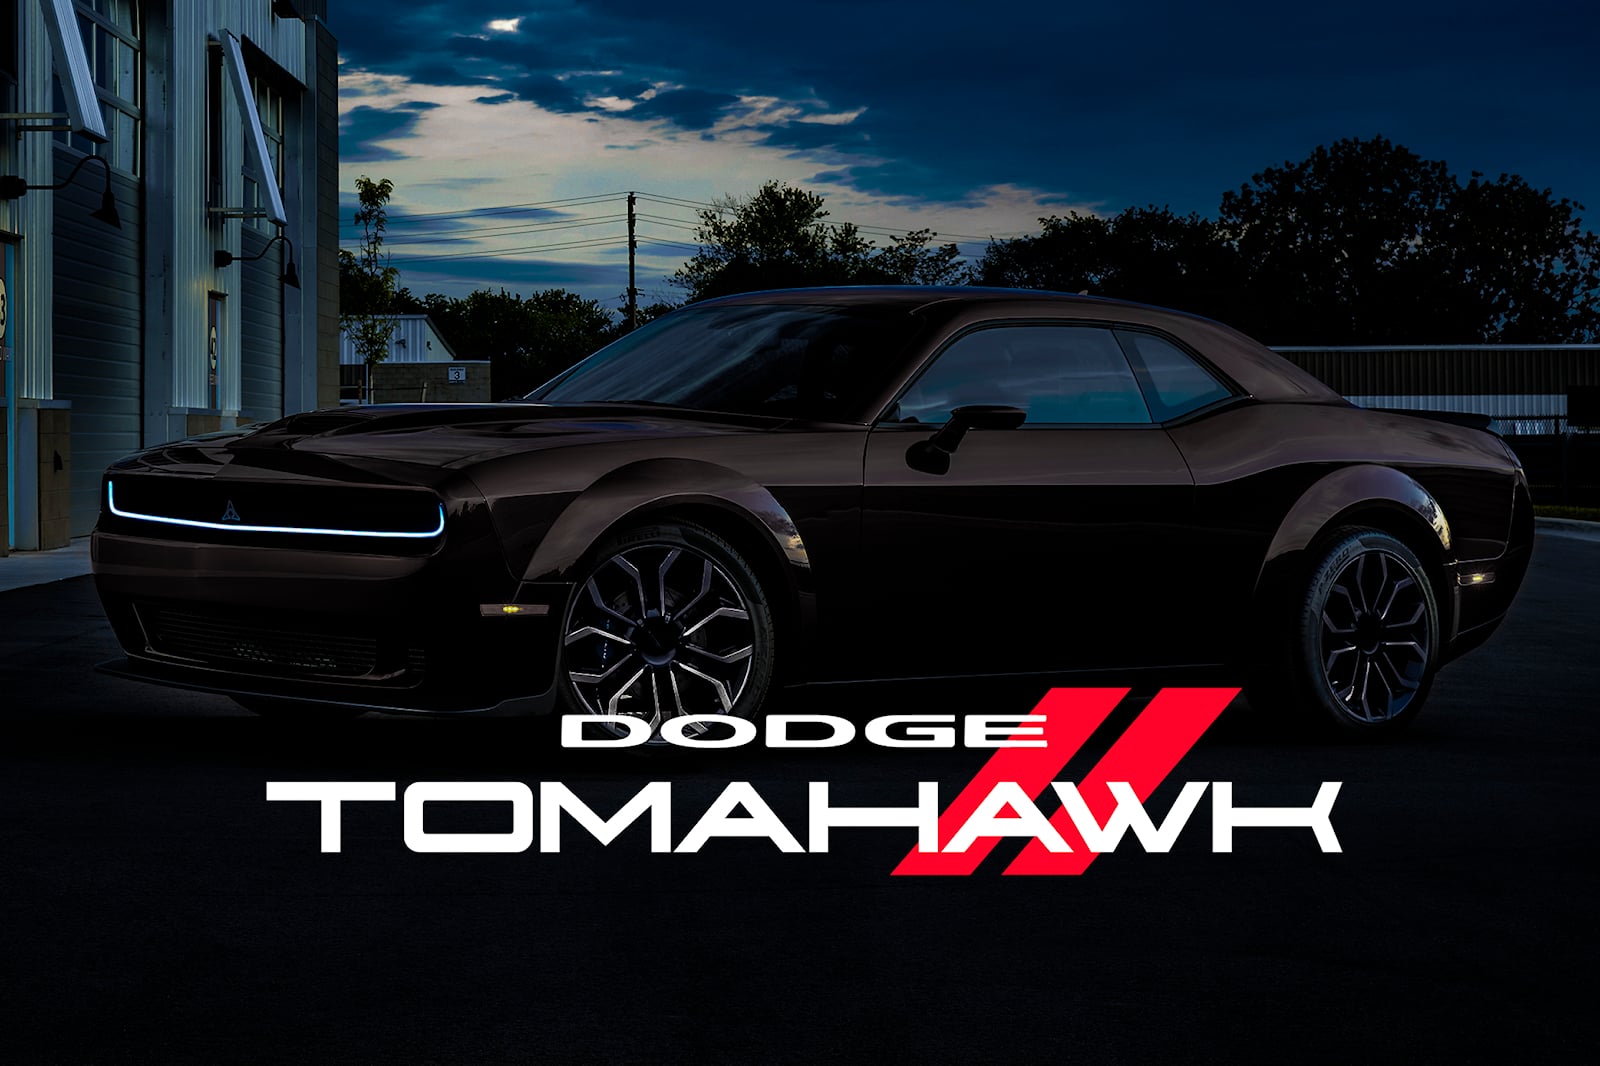 Challenger Tomahawk Is A Sweet Name For Dodges Next EV Muscle Car